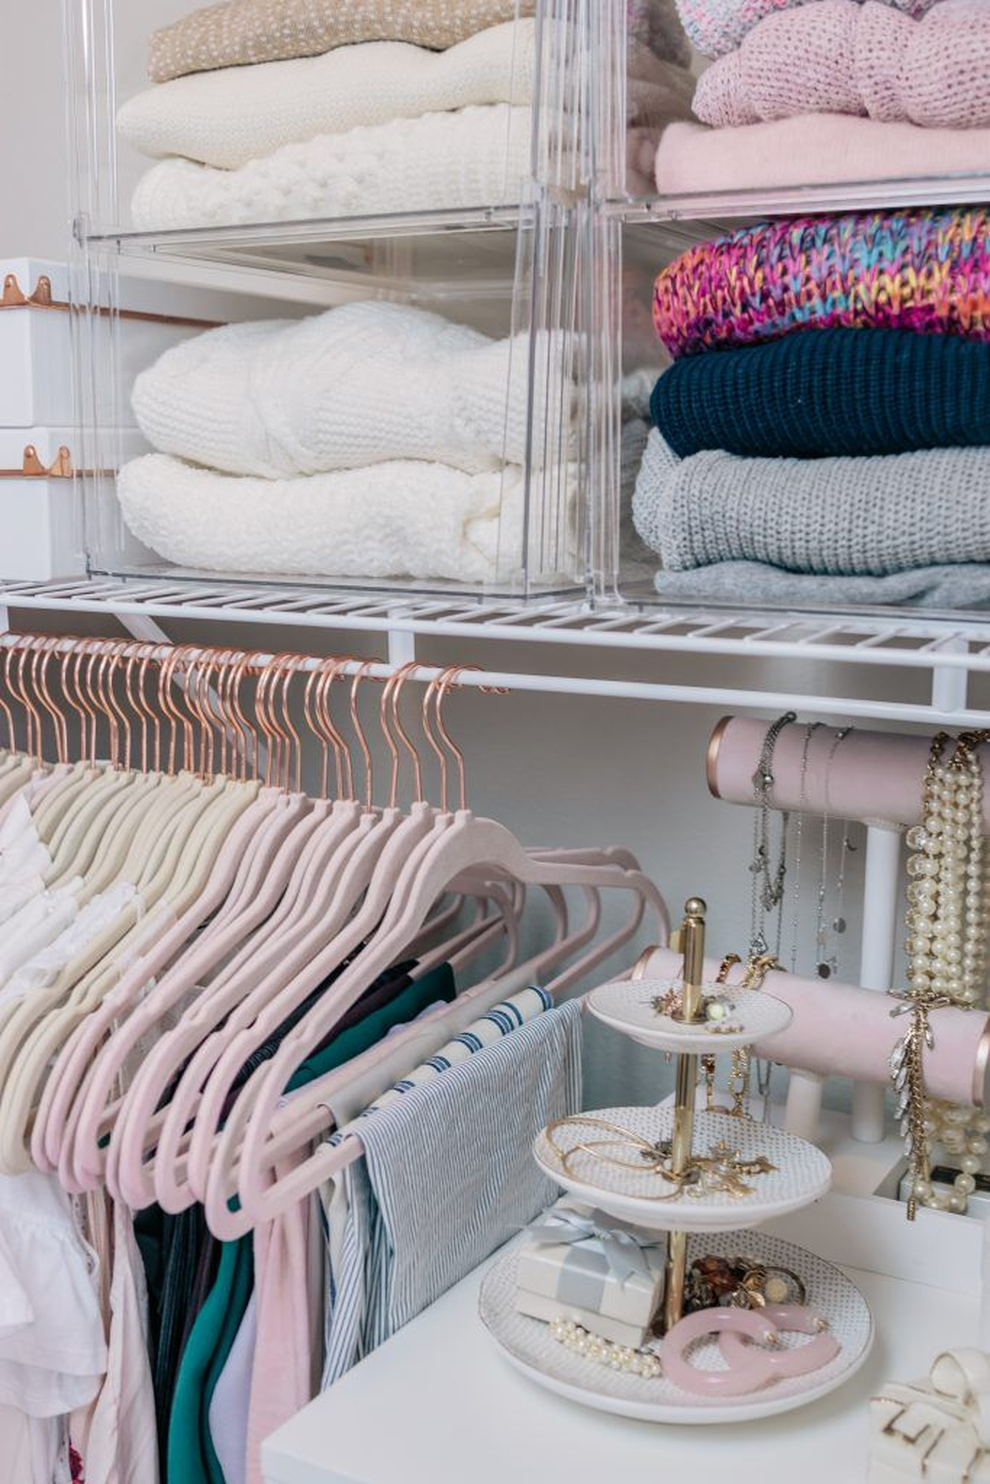 15 ideas to save space for small wardrobe - 14